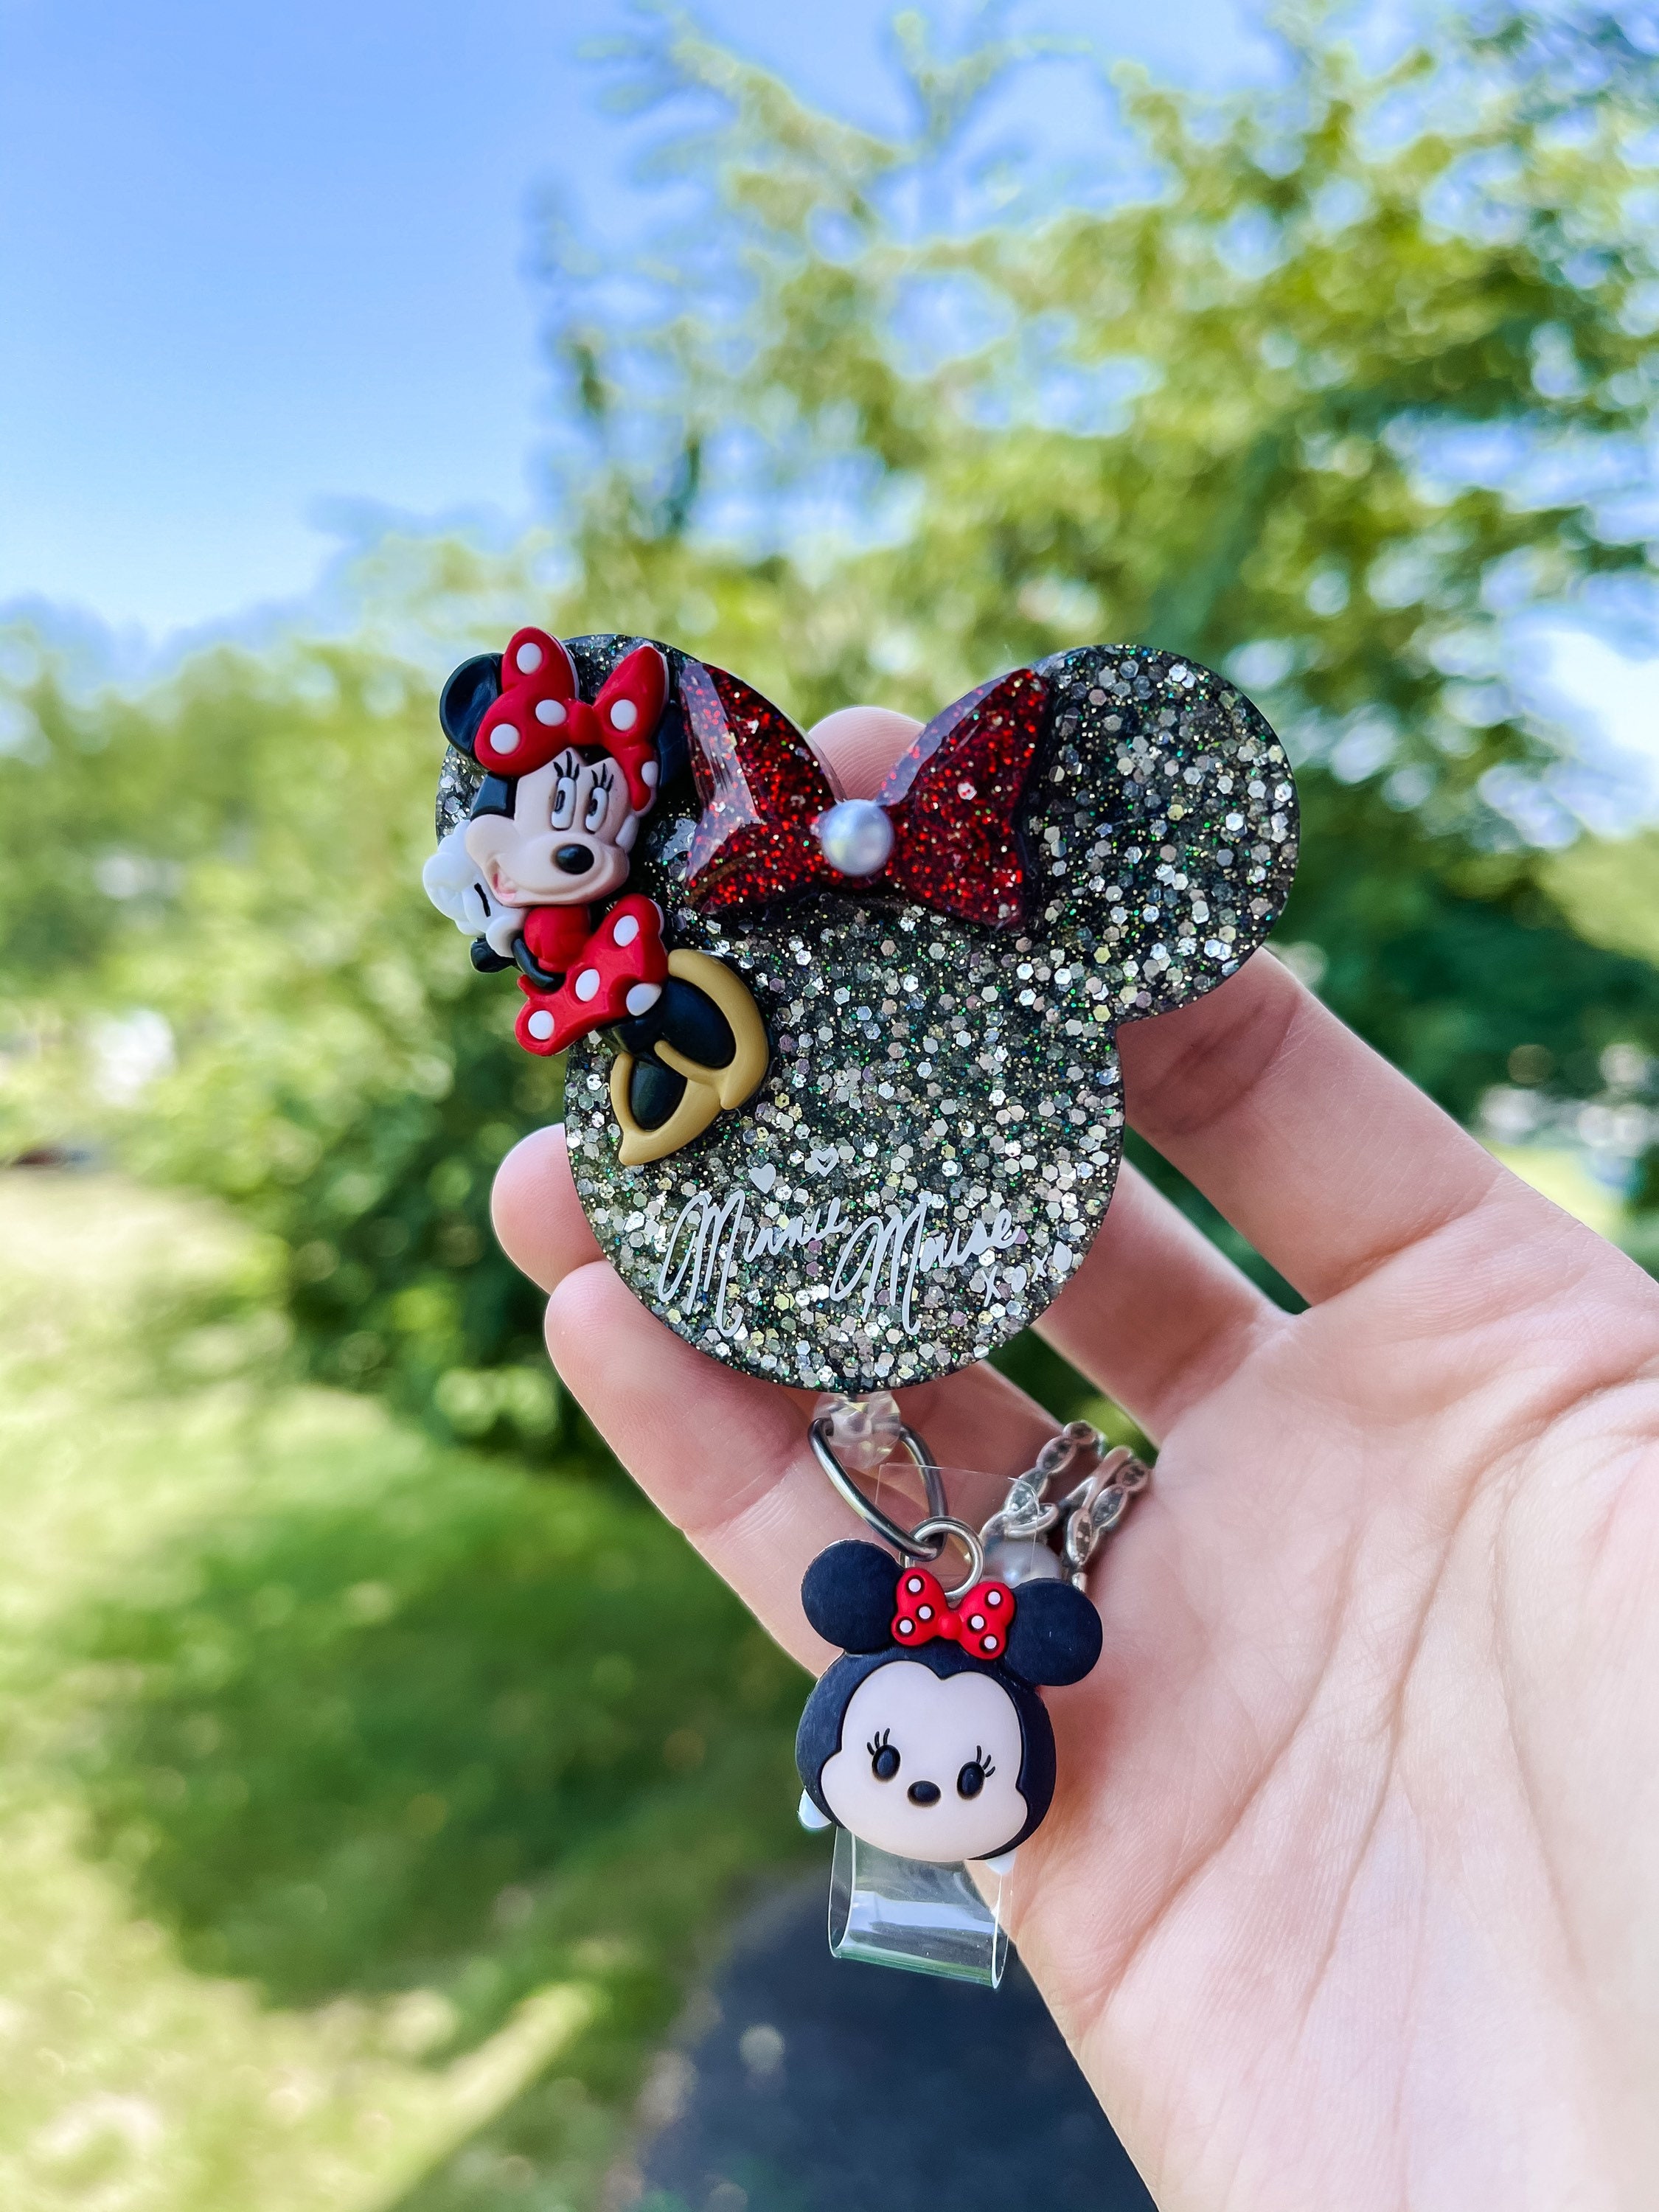 Minnie mouse inspired badge.